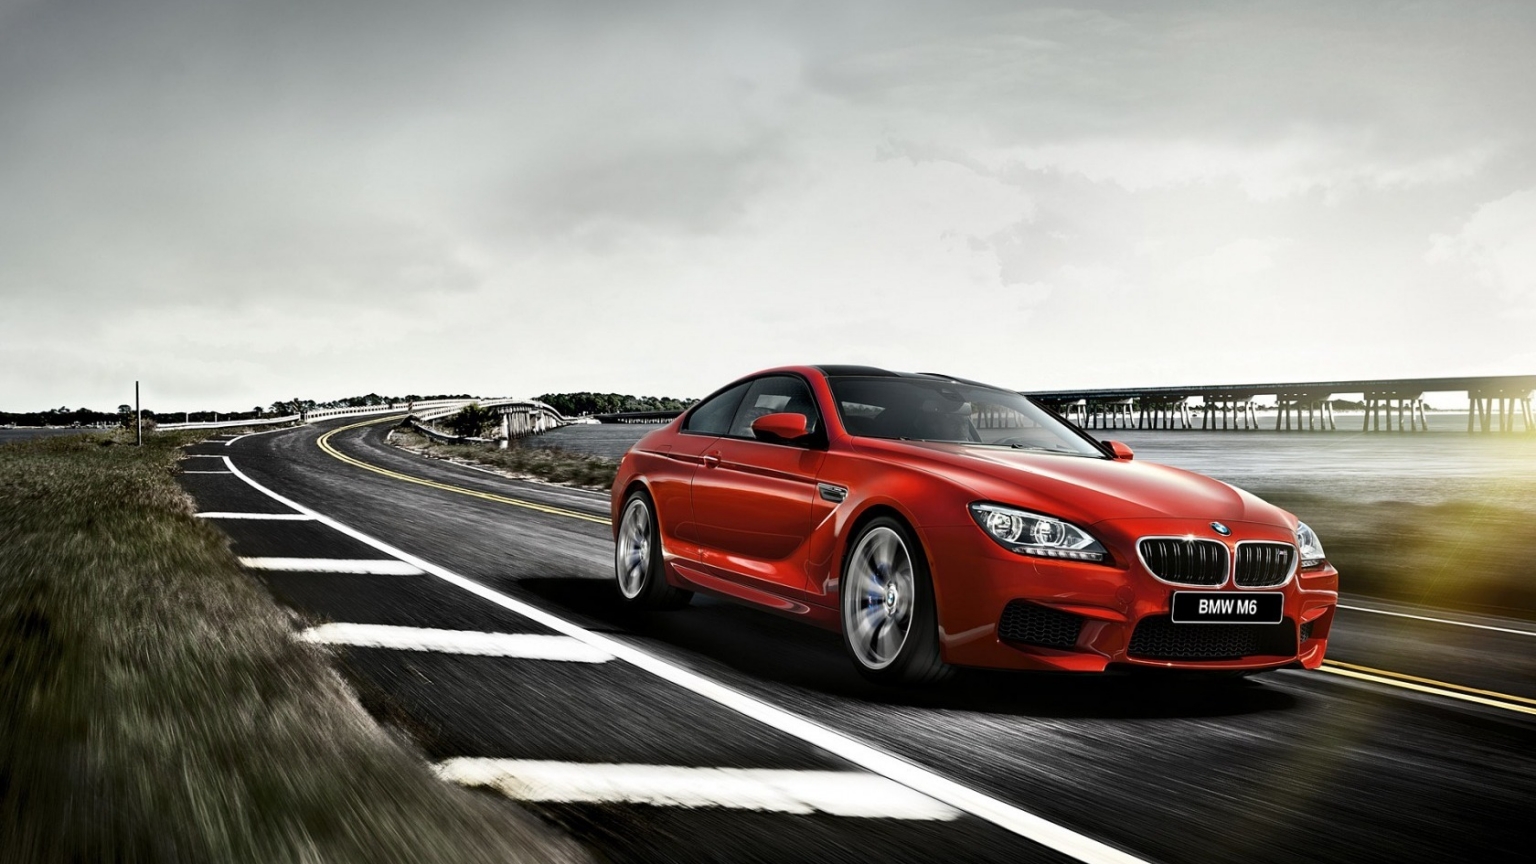 2015 BMW M6 F13 Coupe for 1536 x 864 HDTV resolution